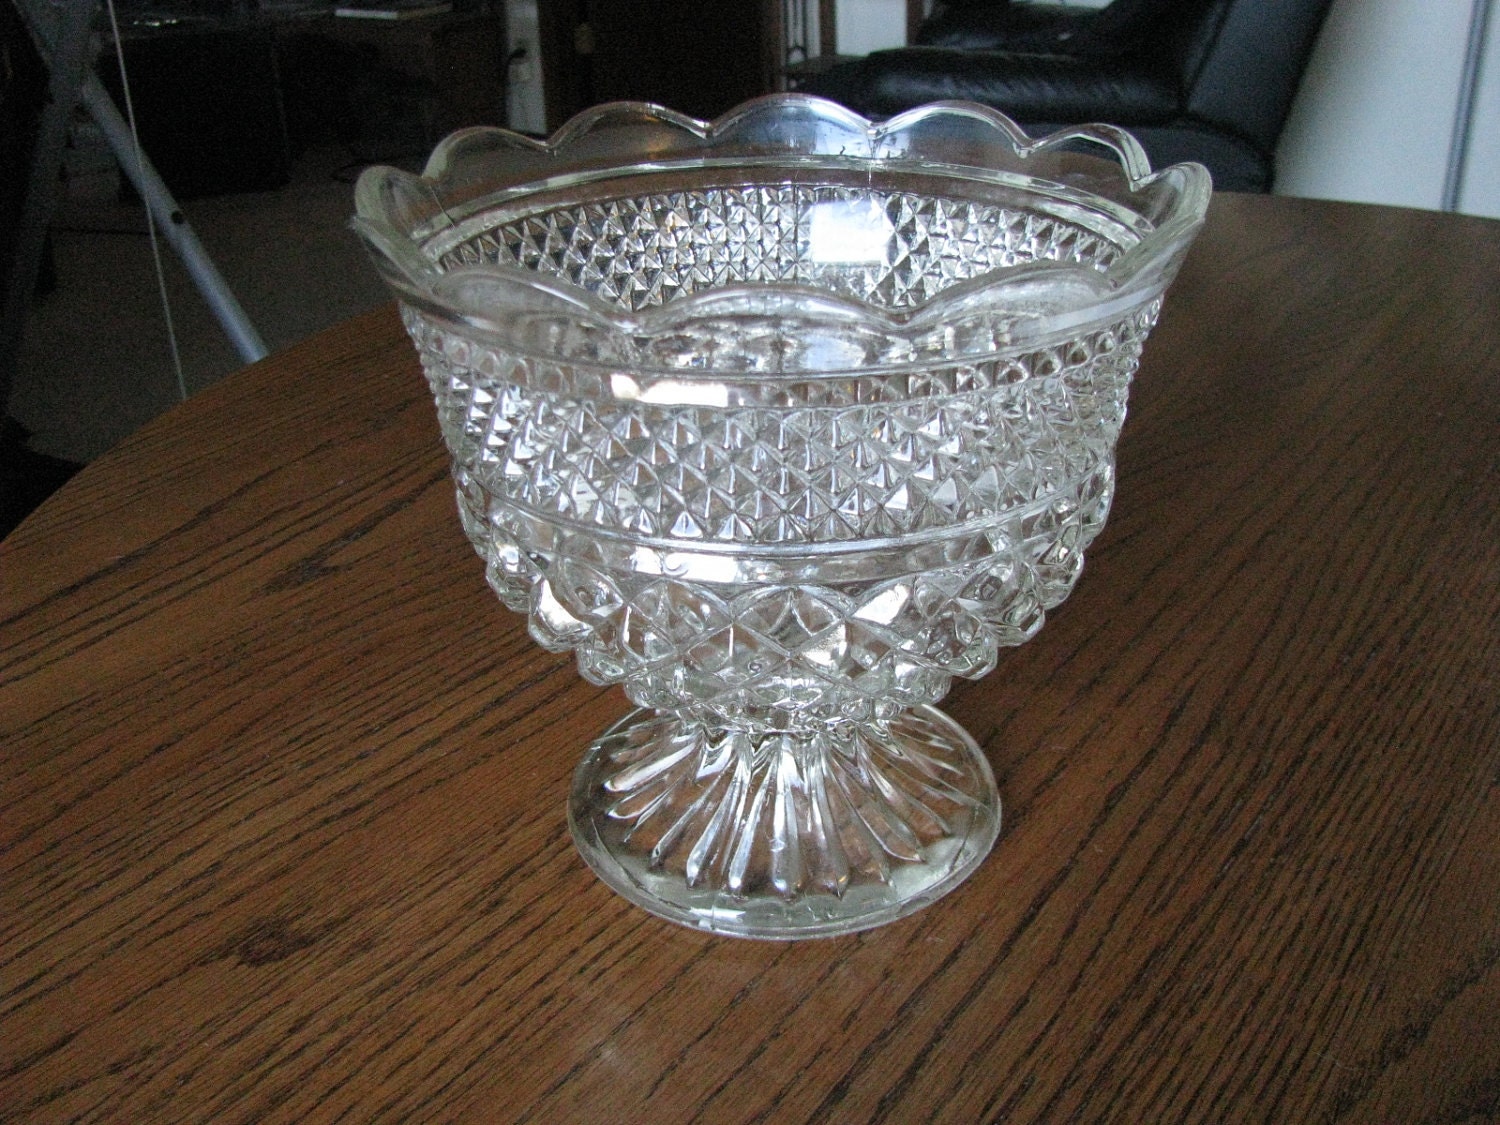 Vintage Glass Compote Footed Fruit Bowl By Vintagedoodads